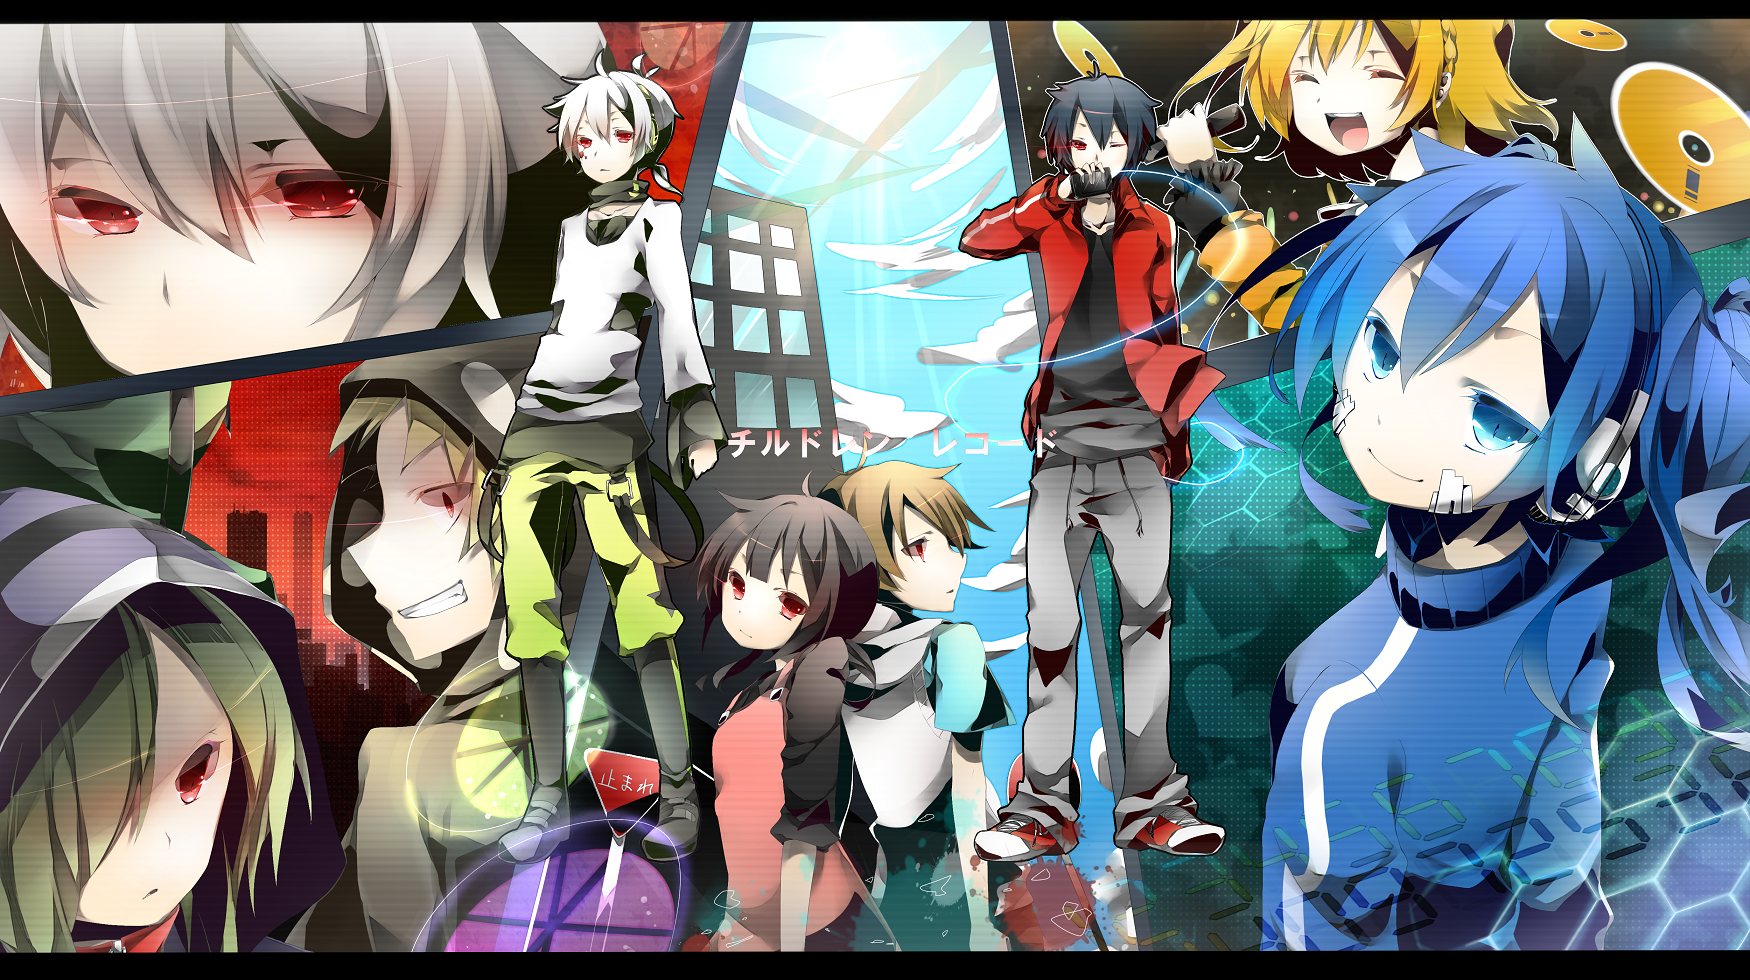 Kagerou Project Wallpapers